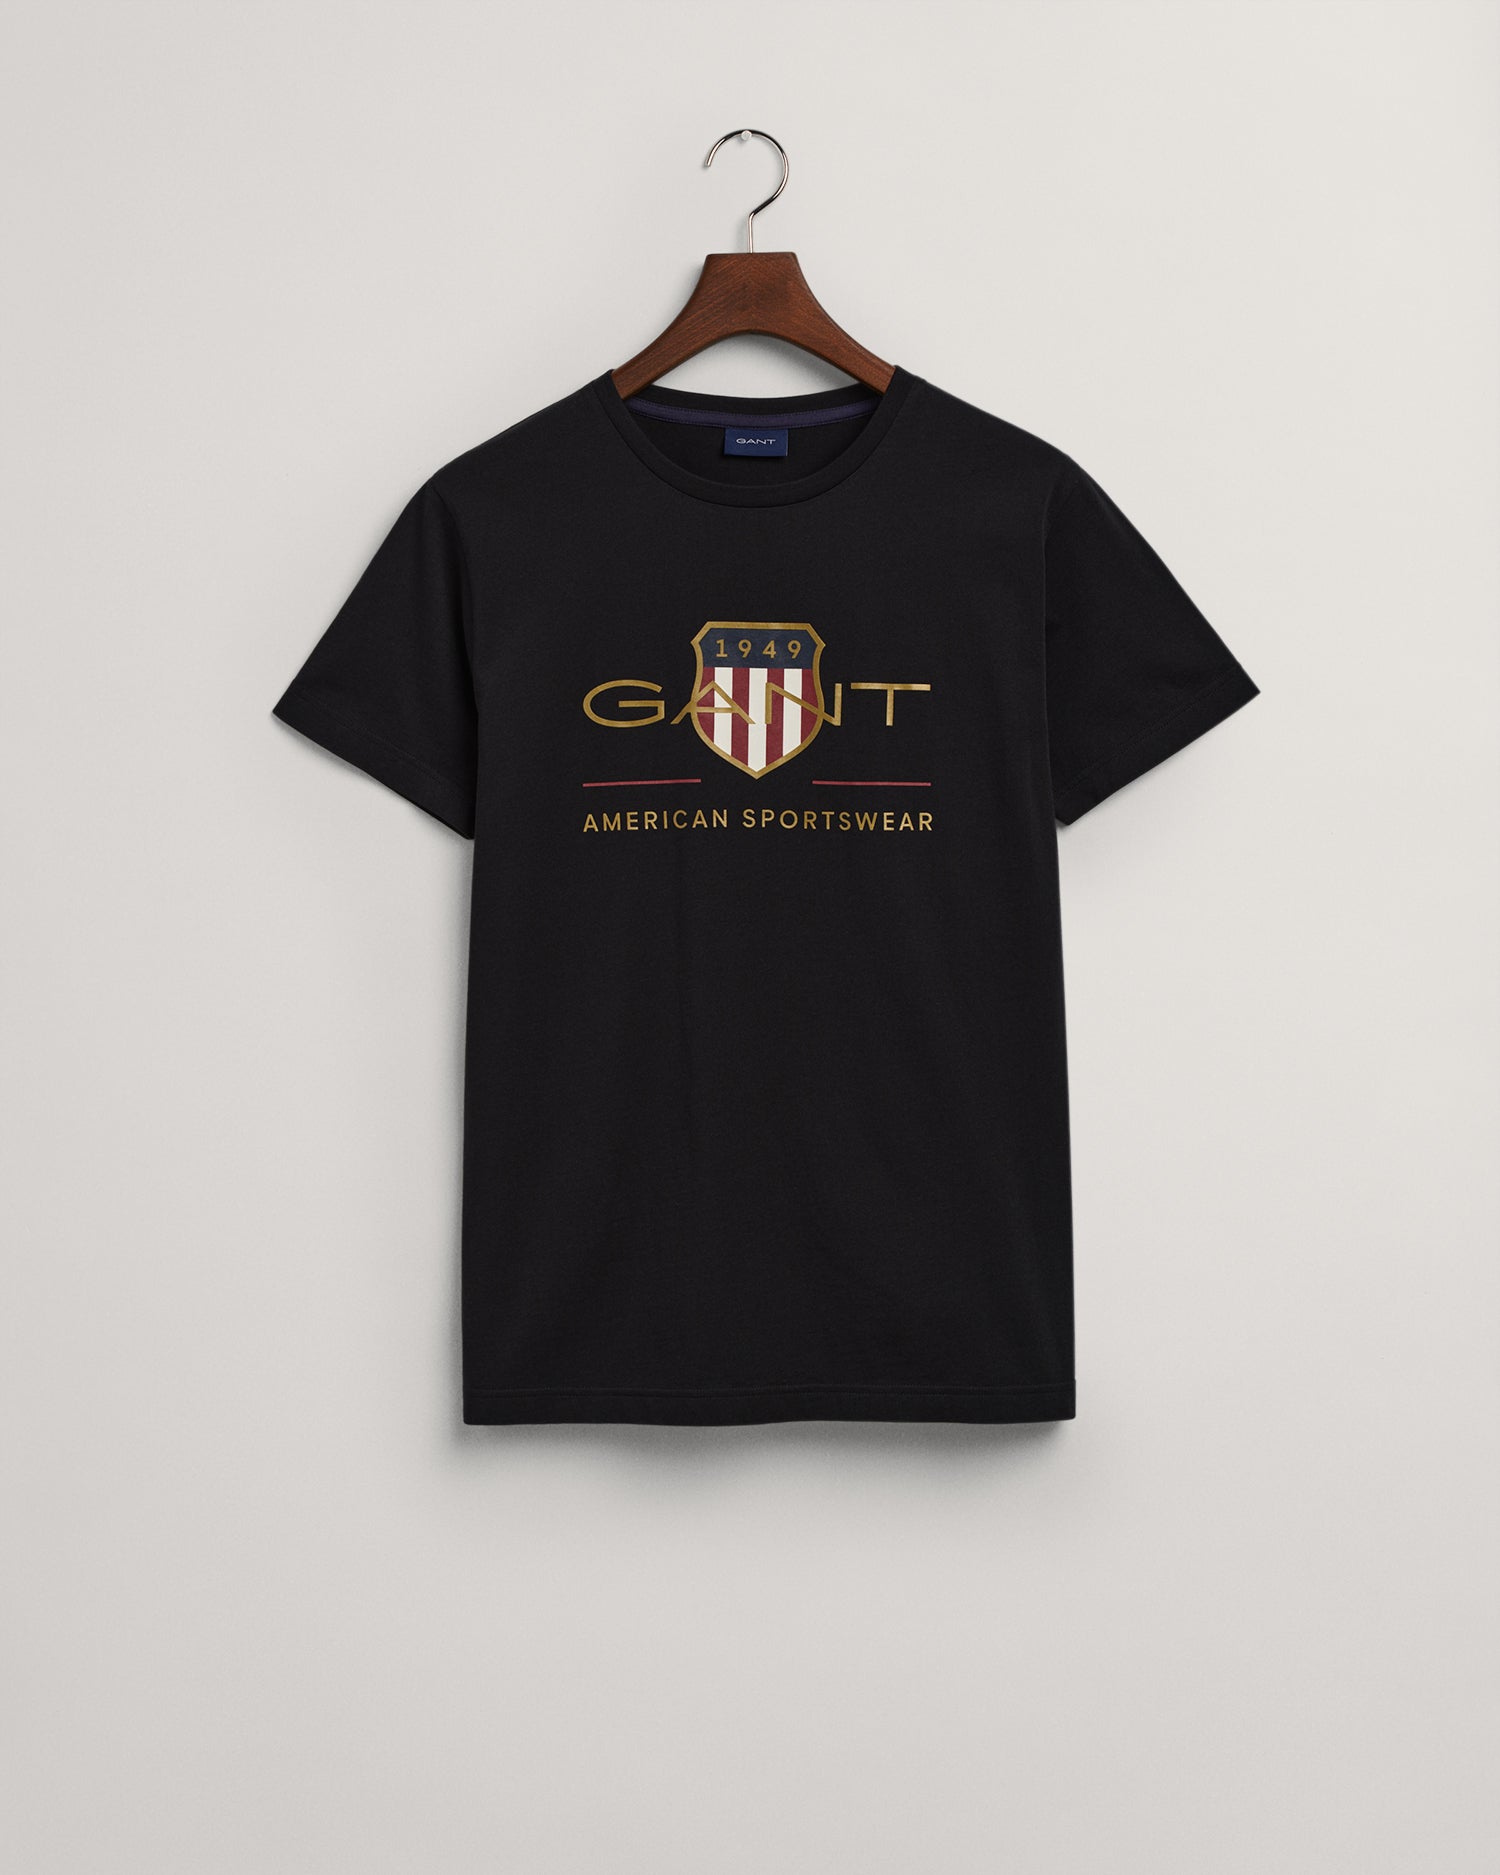 T-Shirt Archive Shield (Outlet)